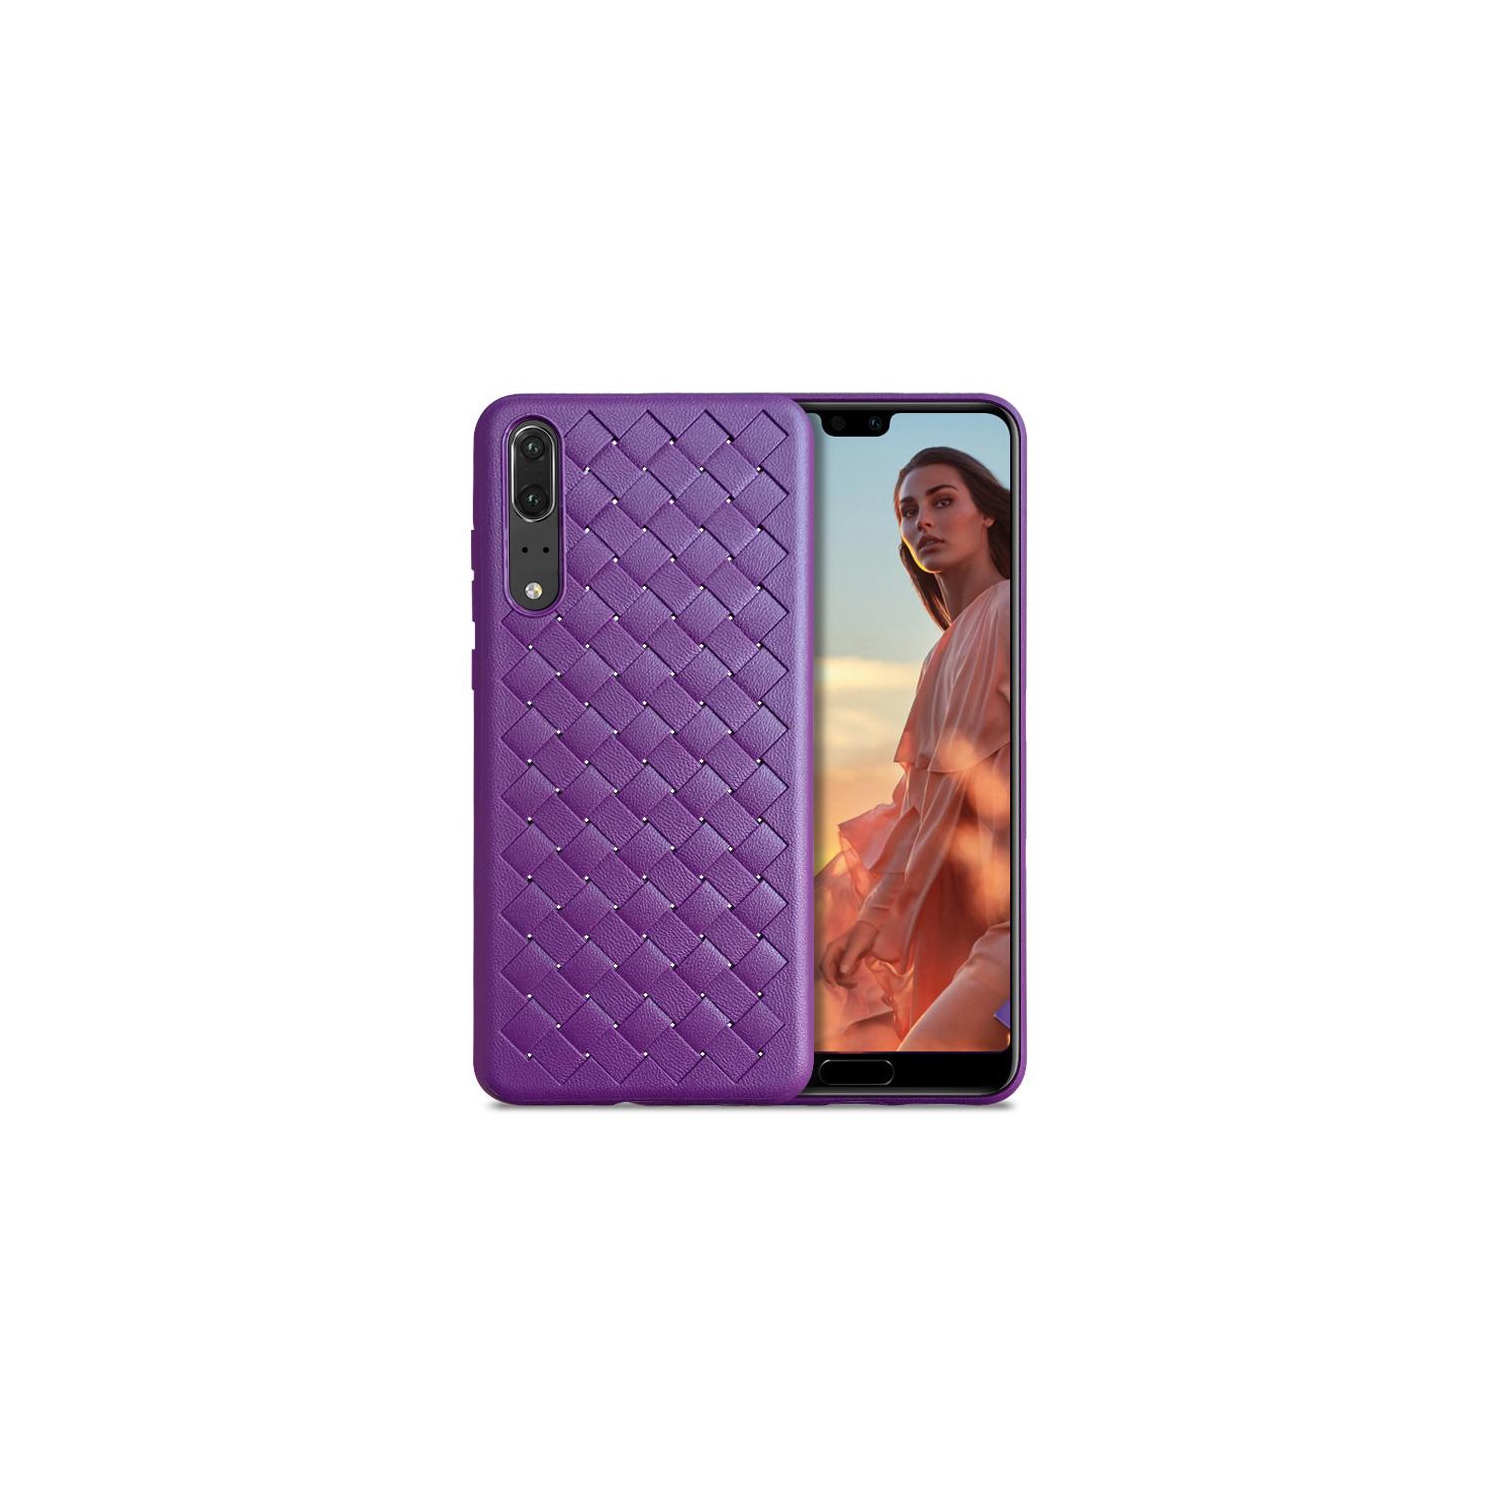 PANDACO Violet Leather Cross-Weave Case for Huawei P20